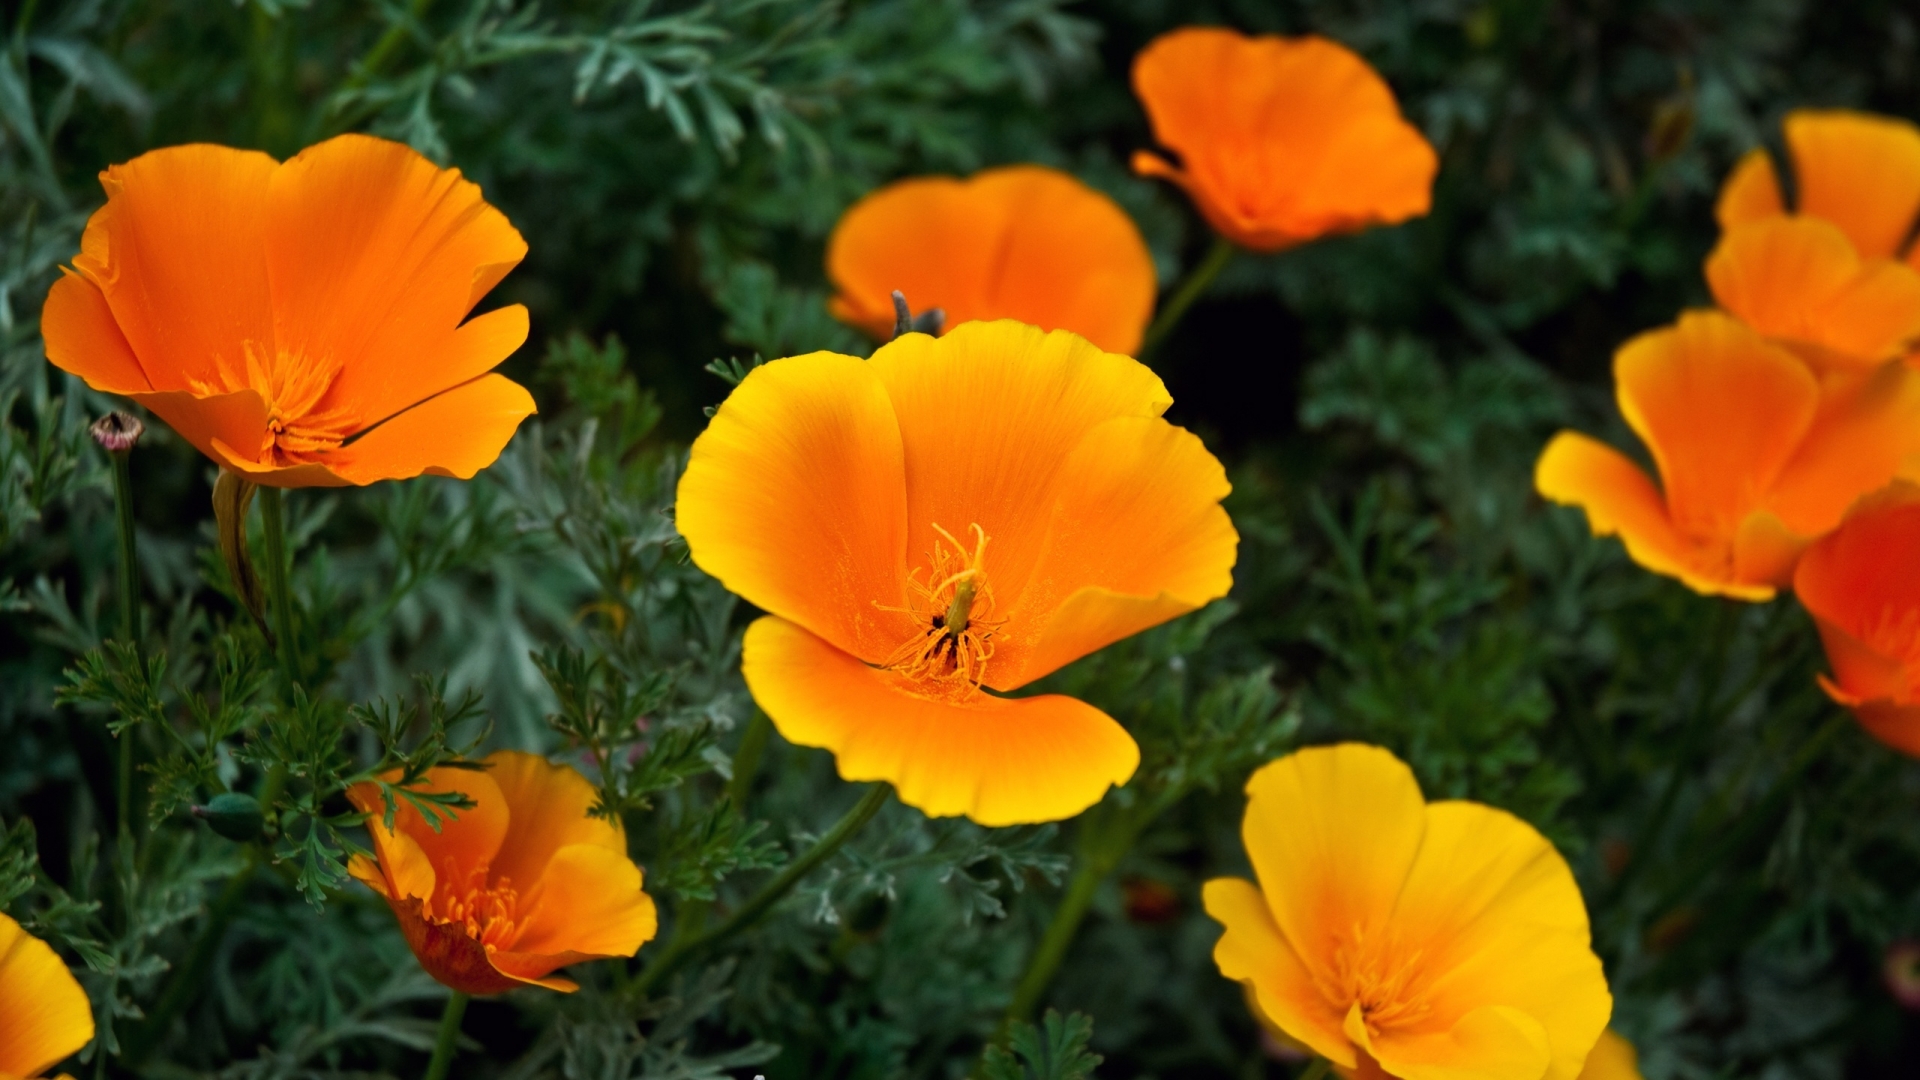 Golden State Poppies for 1920 x 1080 HDTV 1080p resolution